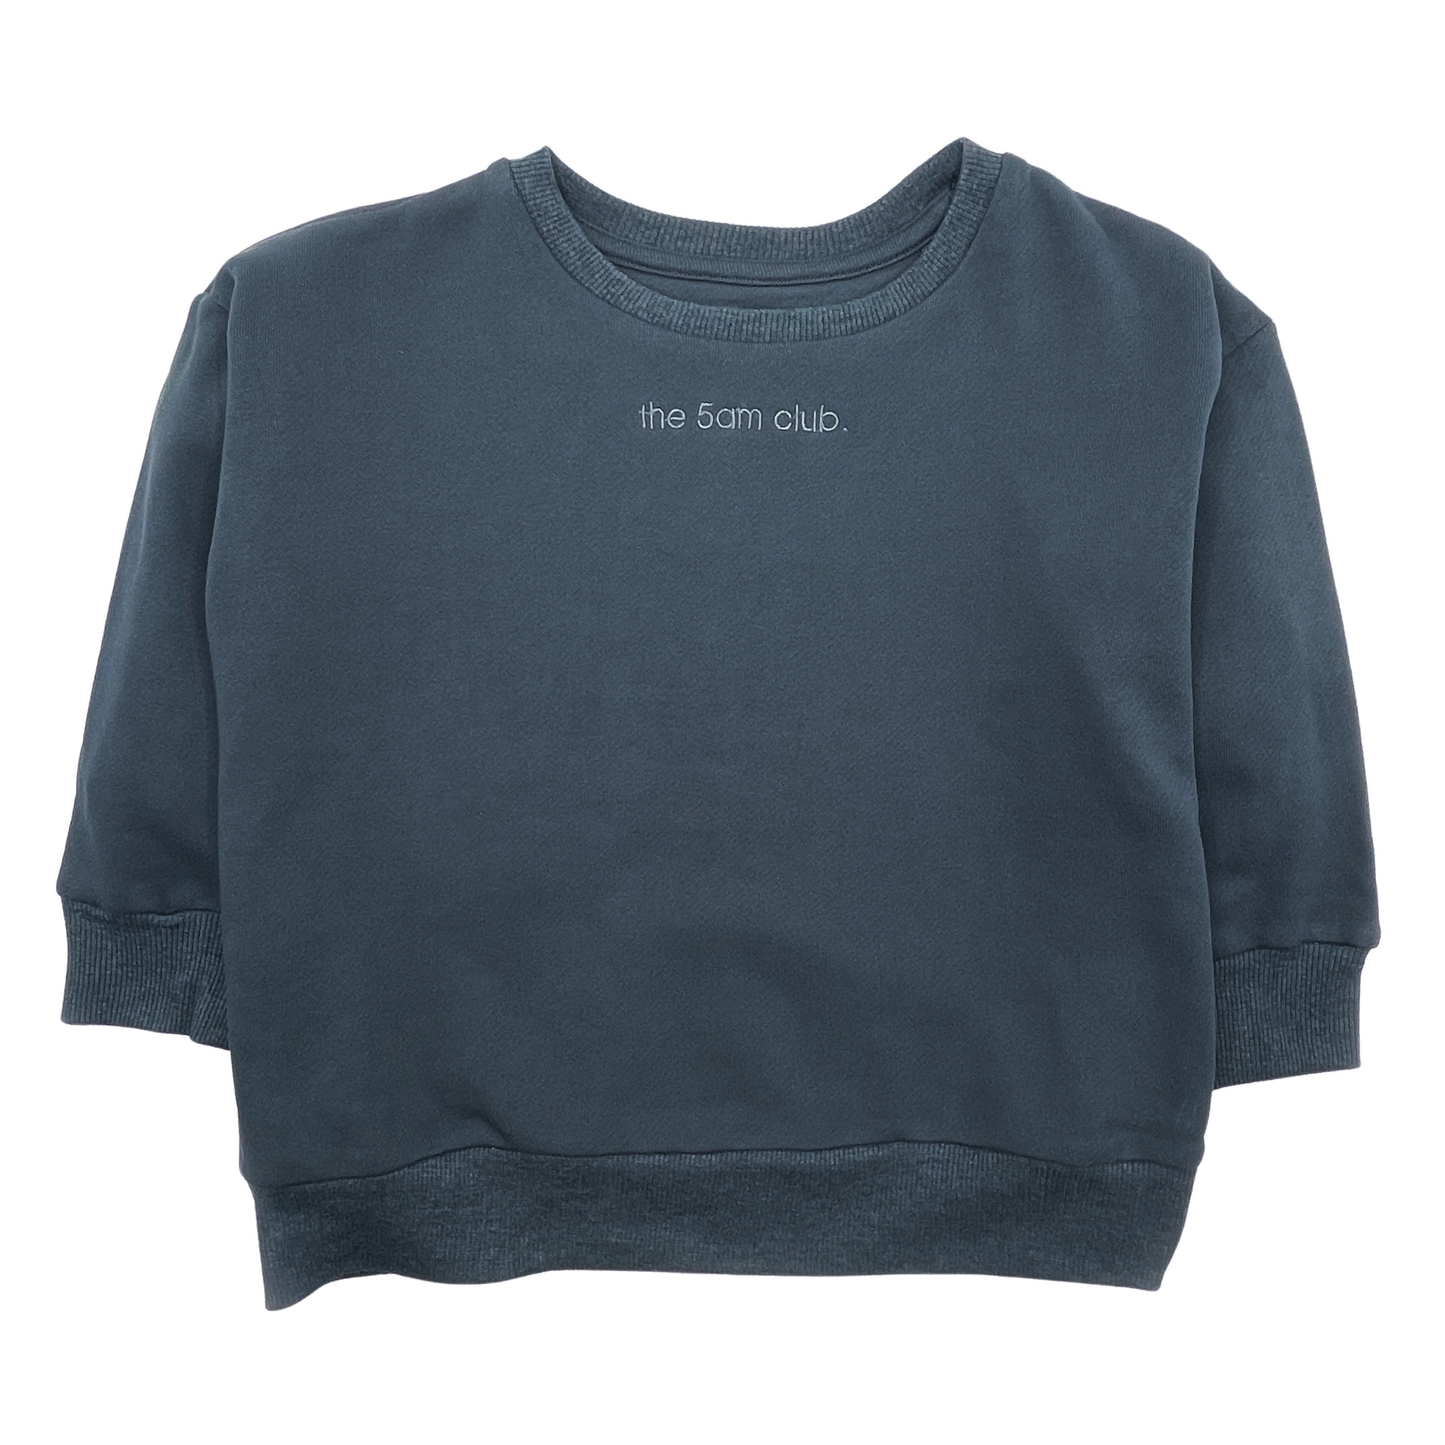 charcoal kids sweatshirt with the 5am club logo on the chest